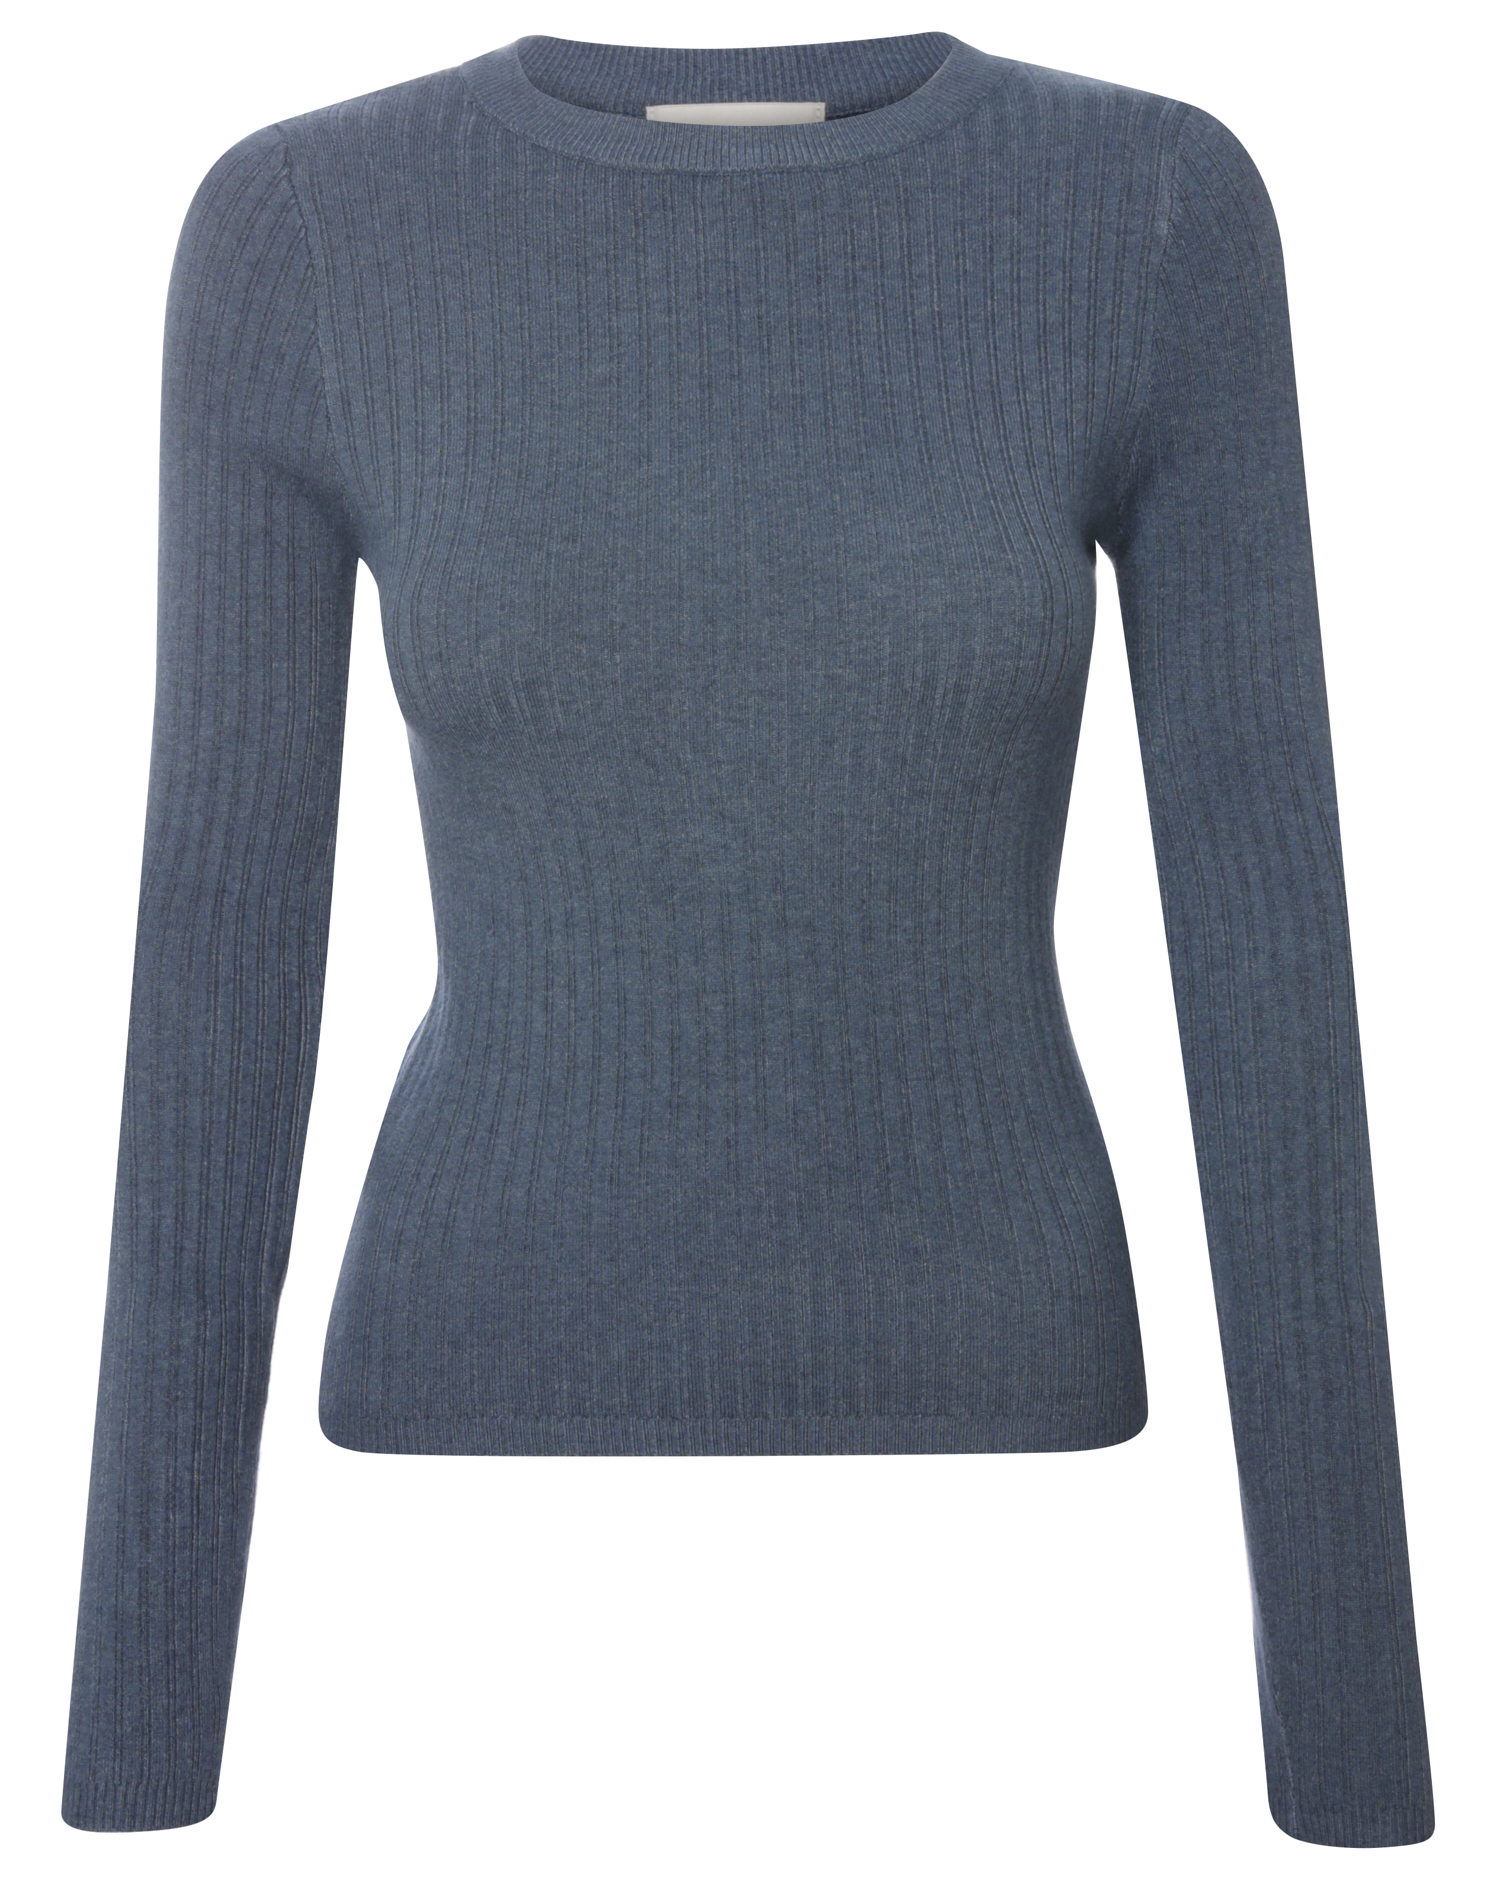 Ribbed Round Neck Sweater Top